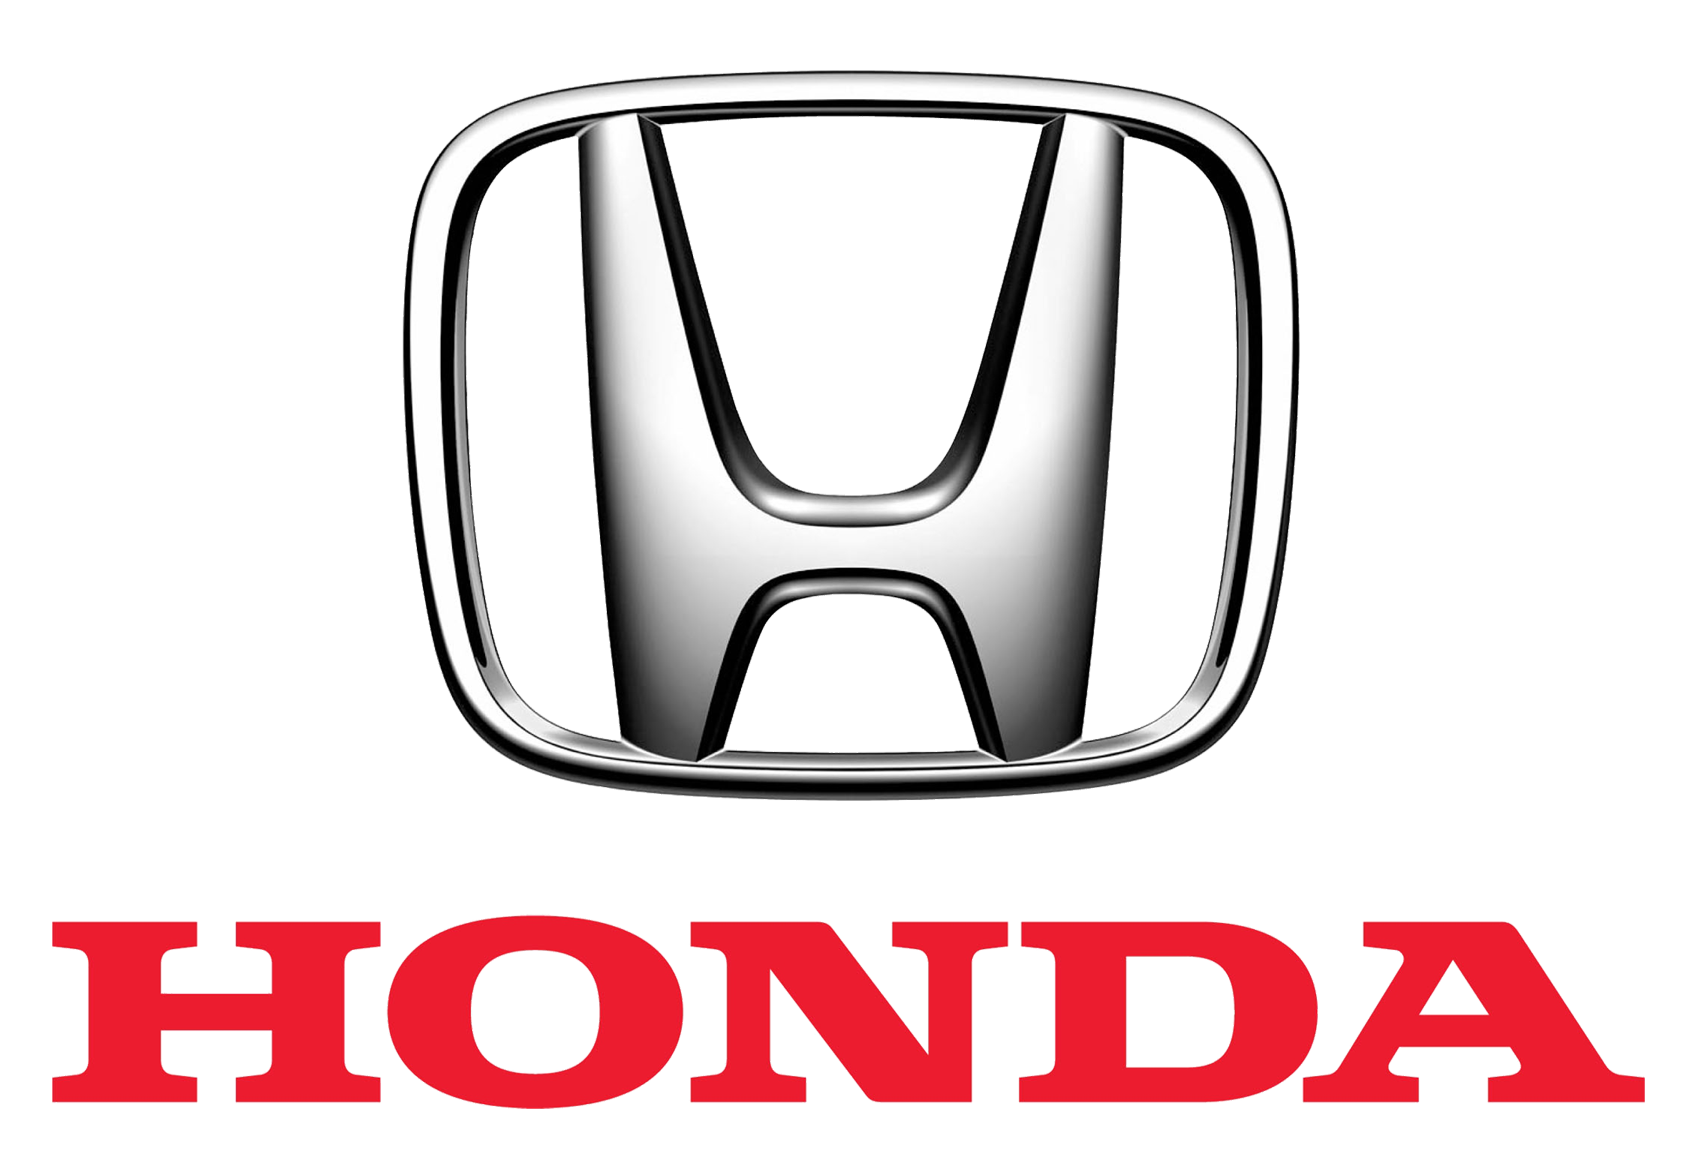 Honda Redirects Funds From the Cancelled Campus All-Star Challenge Program to Support HBCU Communities Through Covid-19 Pandemic